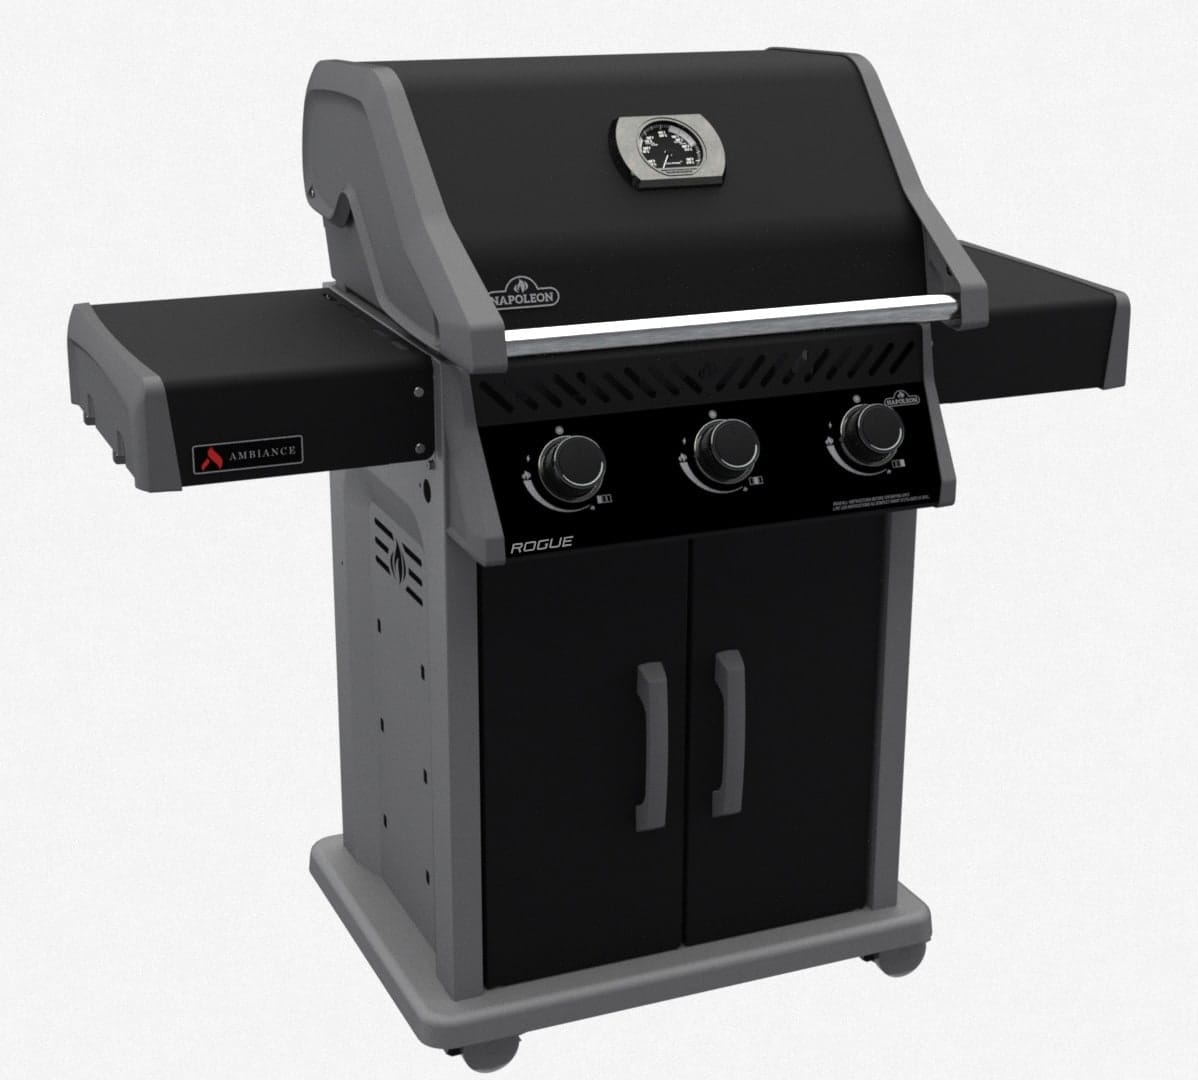 Ambiance 425 Gas Grill